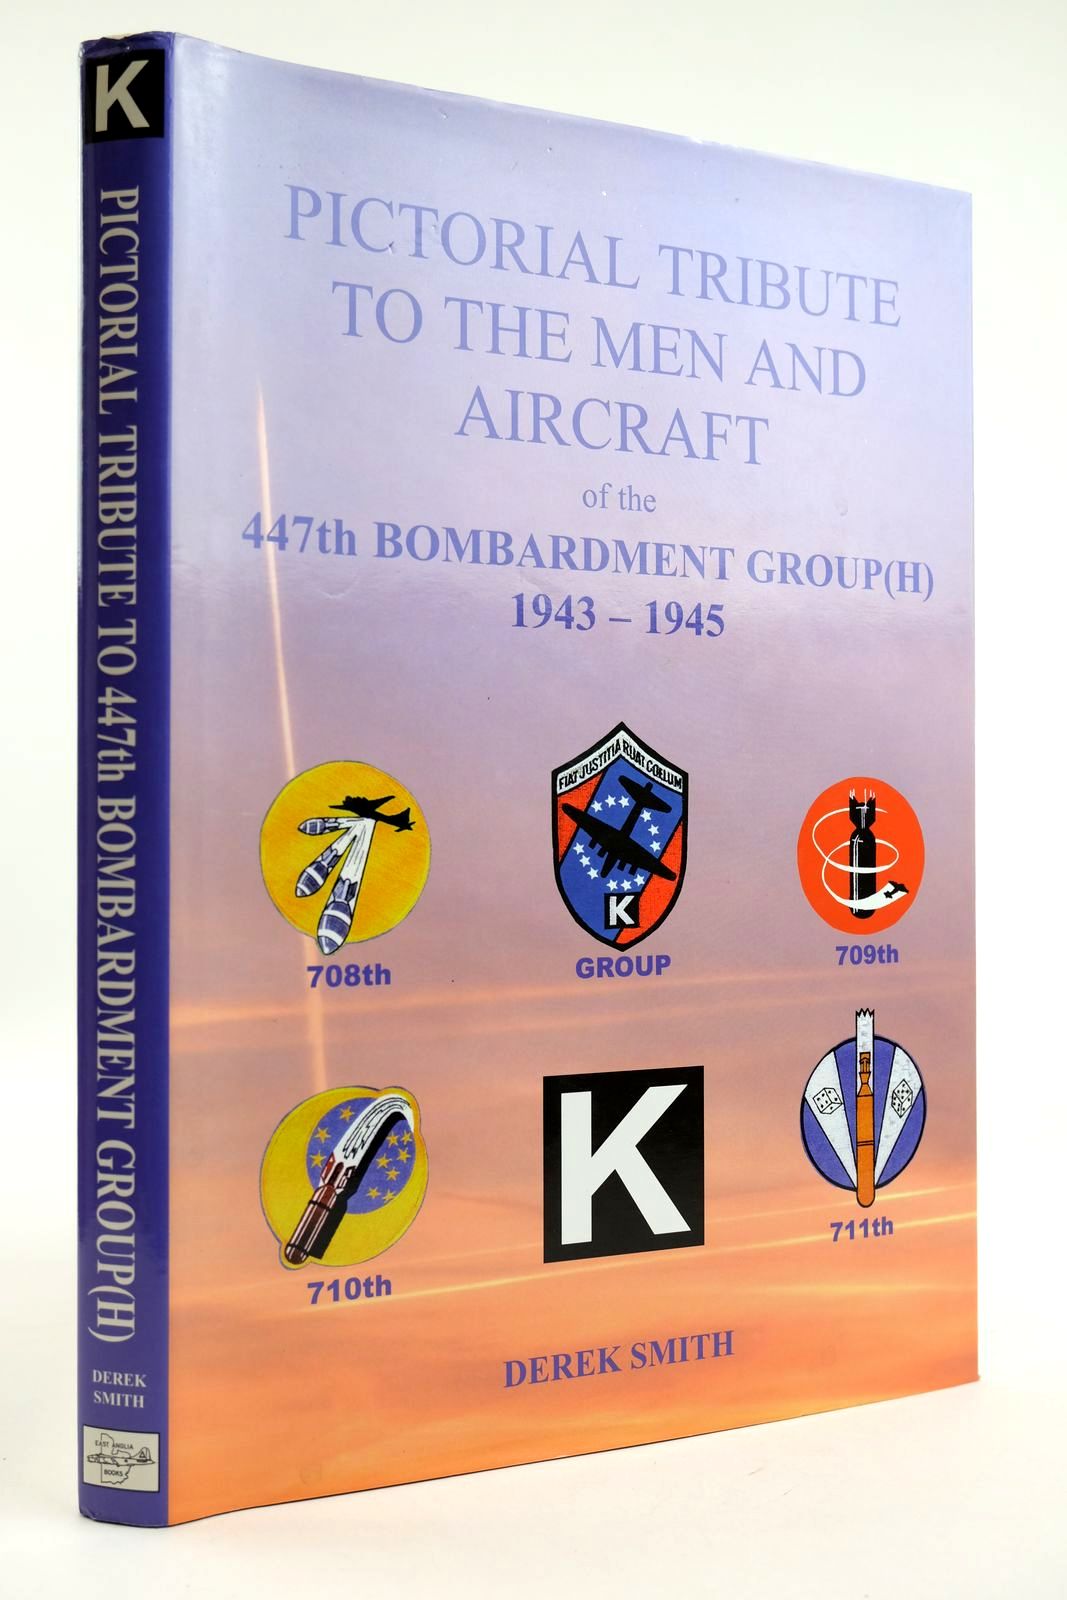 Photo of PICTORIAL TRIBUTE TO THE MEN AND AIRCRAFT OF THE 447TH BOMBARDMENT GROUP(H) 1943-1945 written by Smith, Derek published by East Anglia Books (STOCK CODE: 2132227)  for sale by Stella & Rose's Books